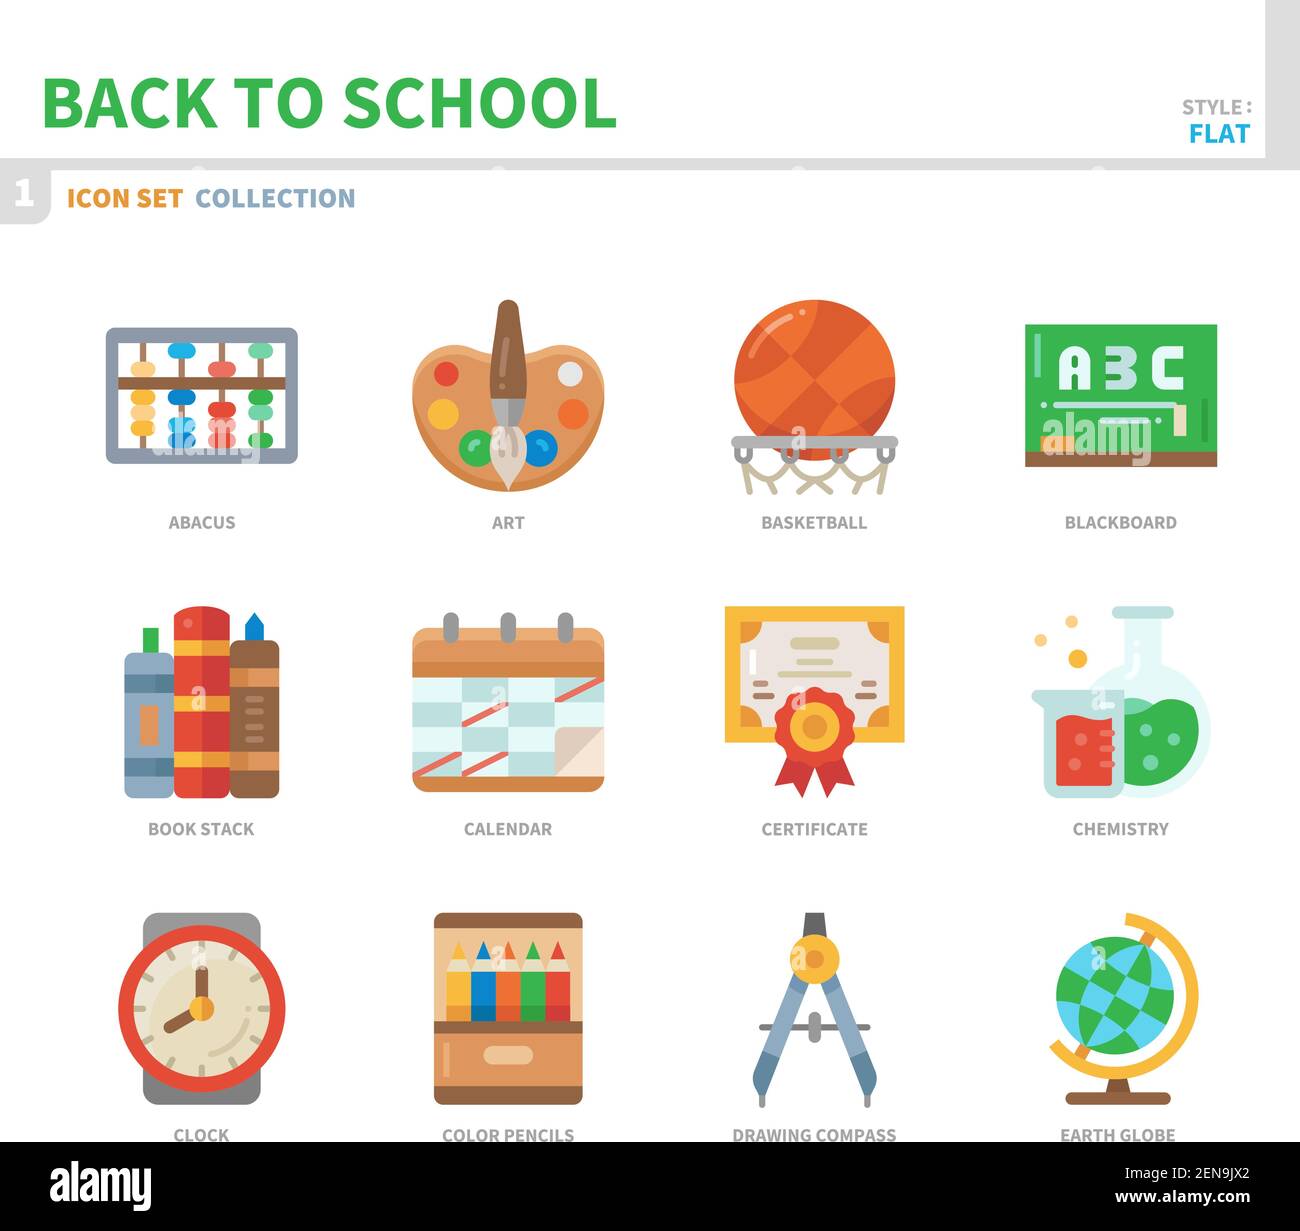 back to school icon set,color flat style,vector and illustration Stock Vector